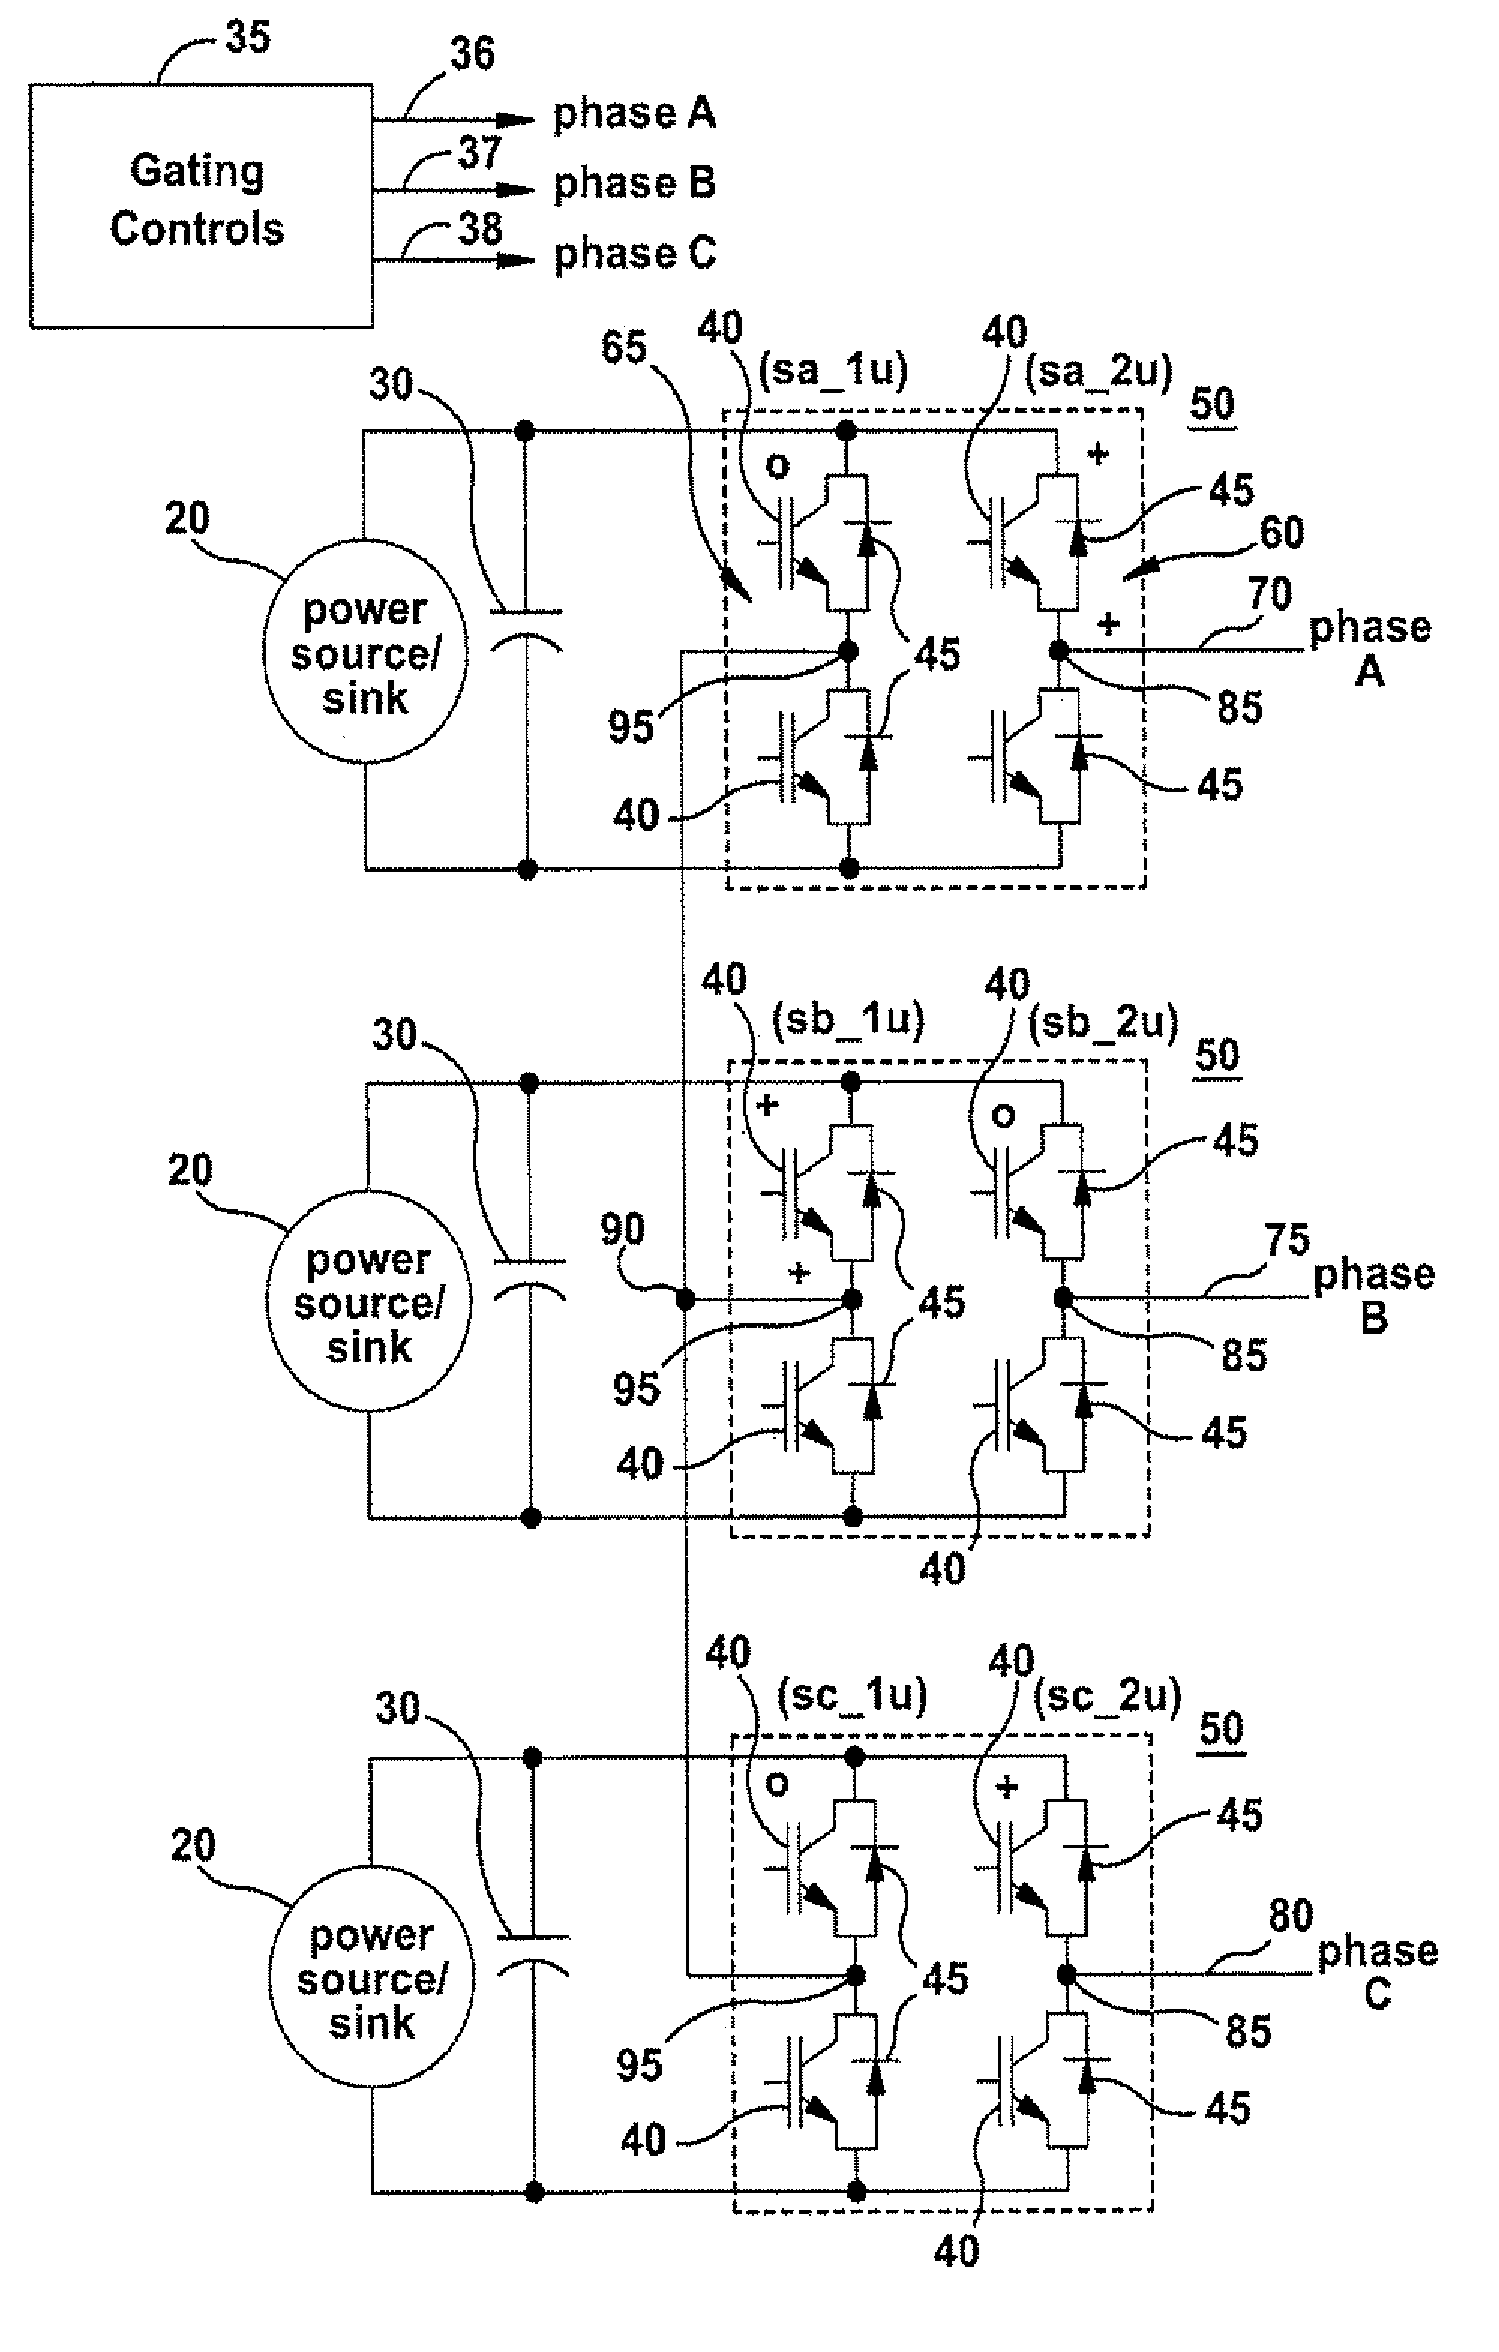 Systems and methods for controlling a converter for powering a load